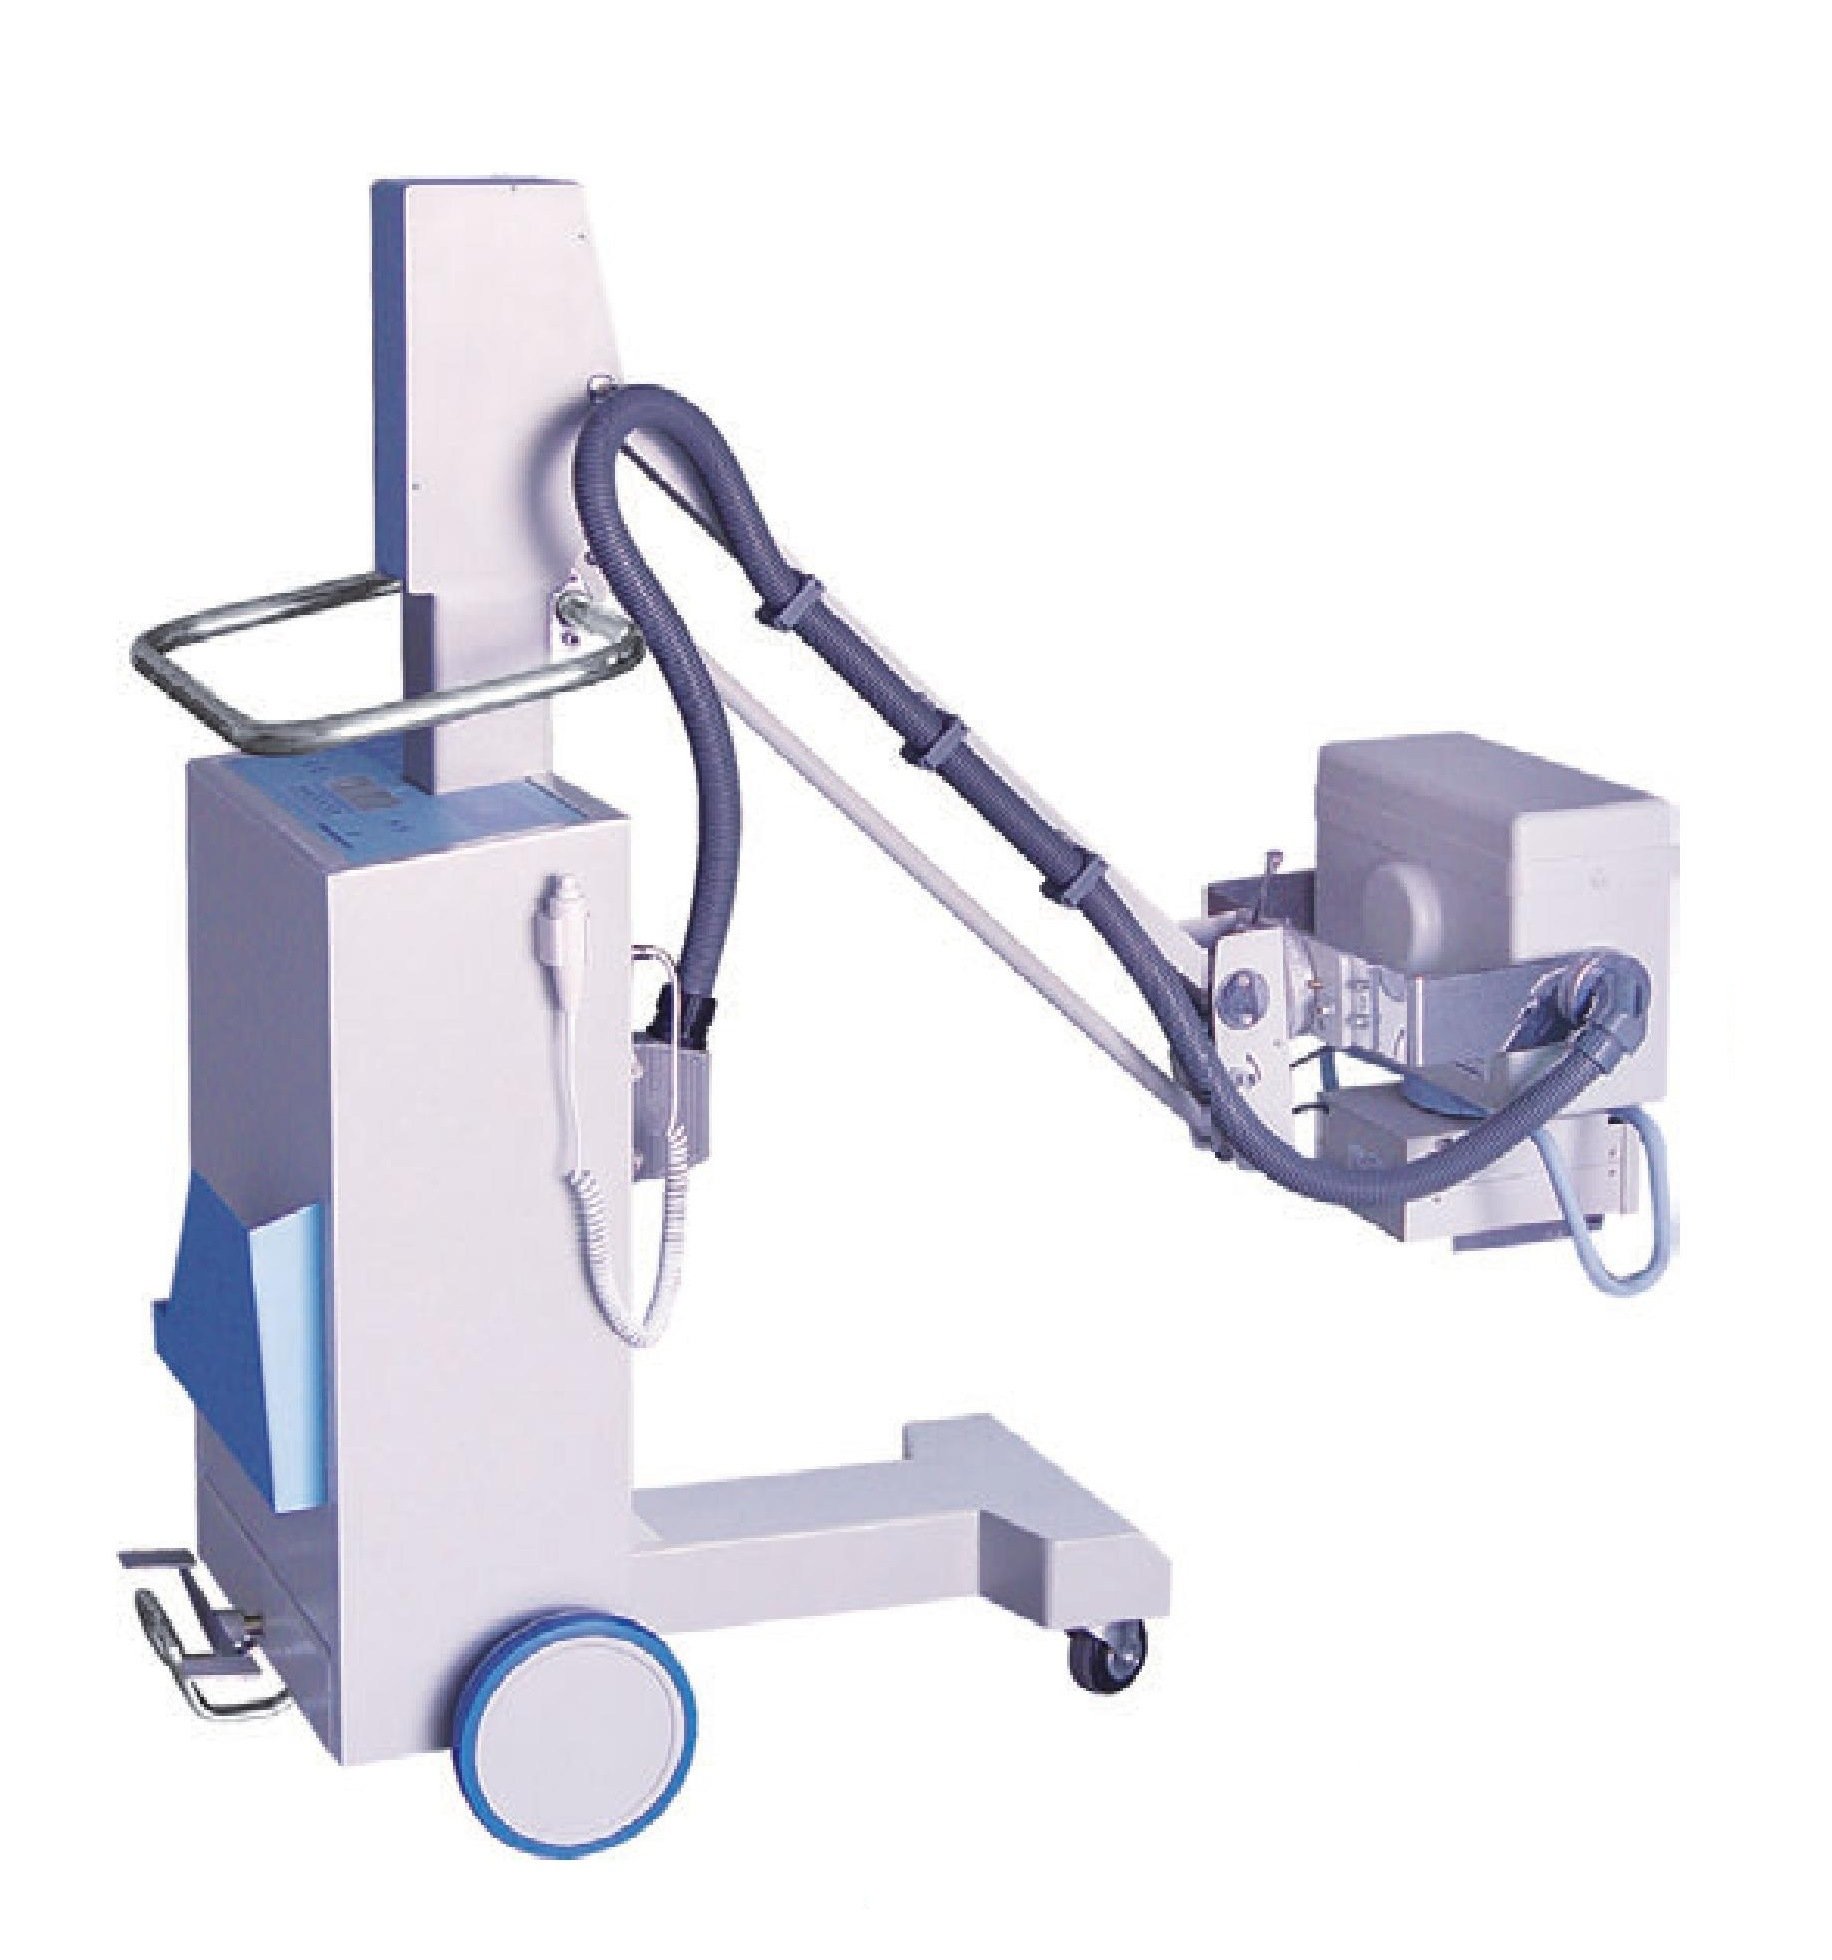 HX-101 Medical Equipment X Ray Unit High Frequency Mobile X-ray Machine For Radiography